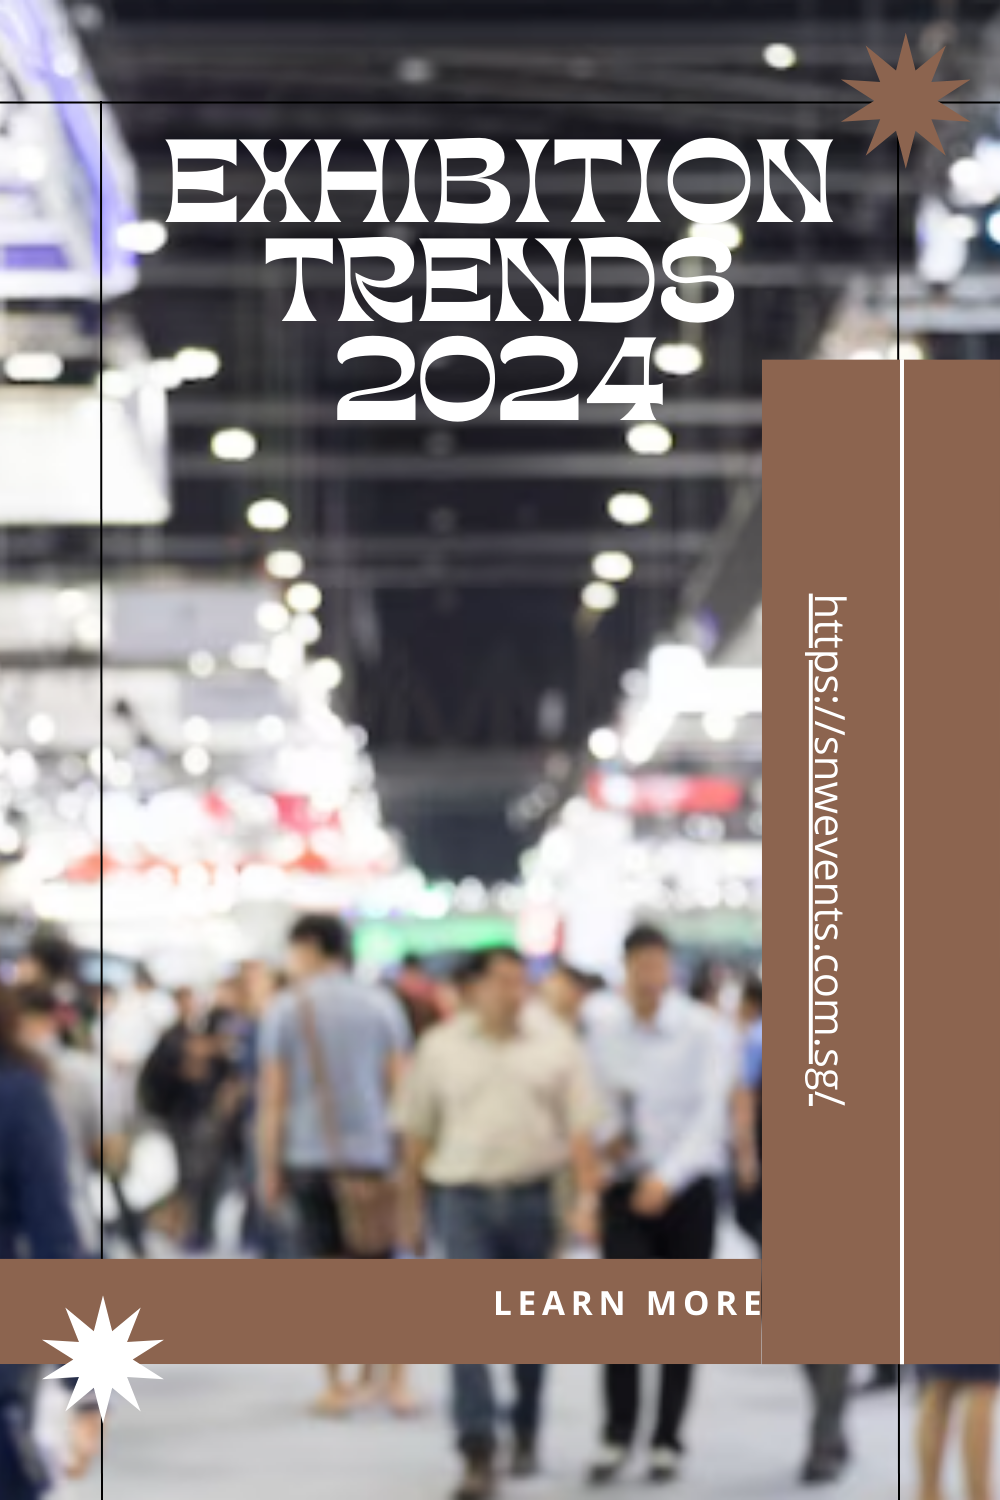 Exhibition Trends 2024: What’s Shaping the Future in Singapore?